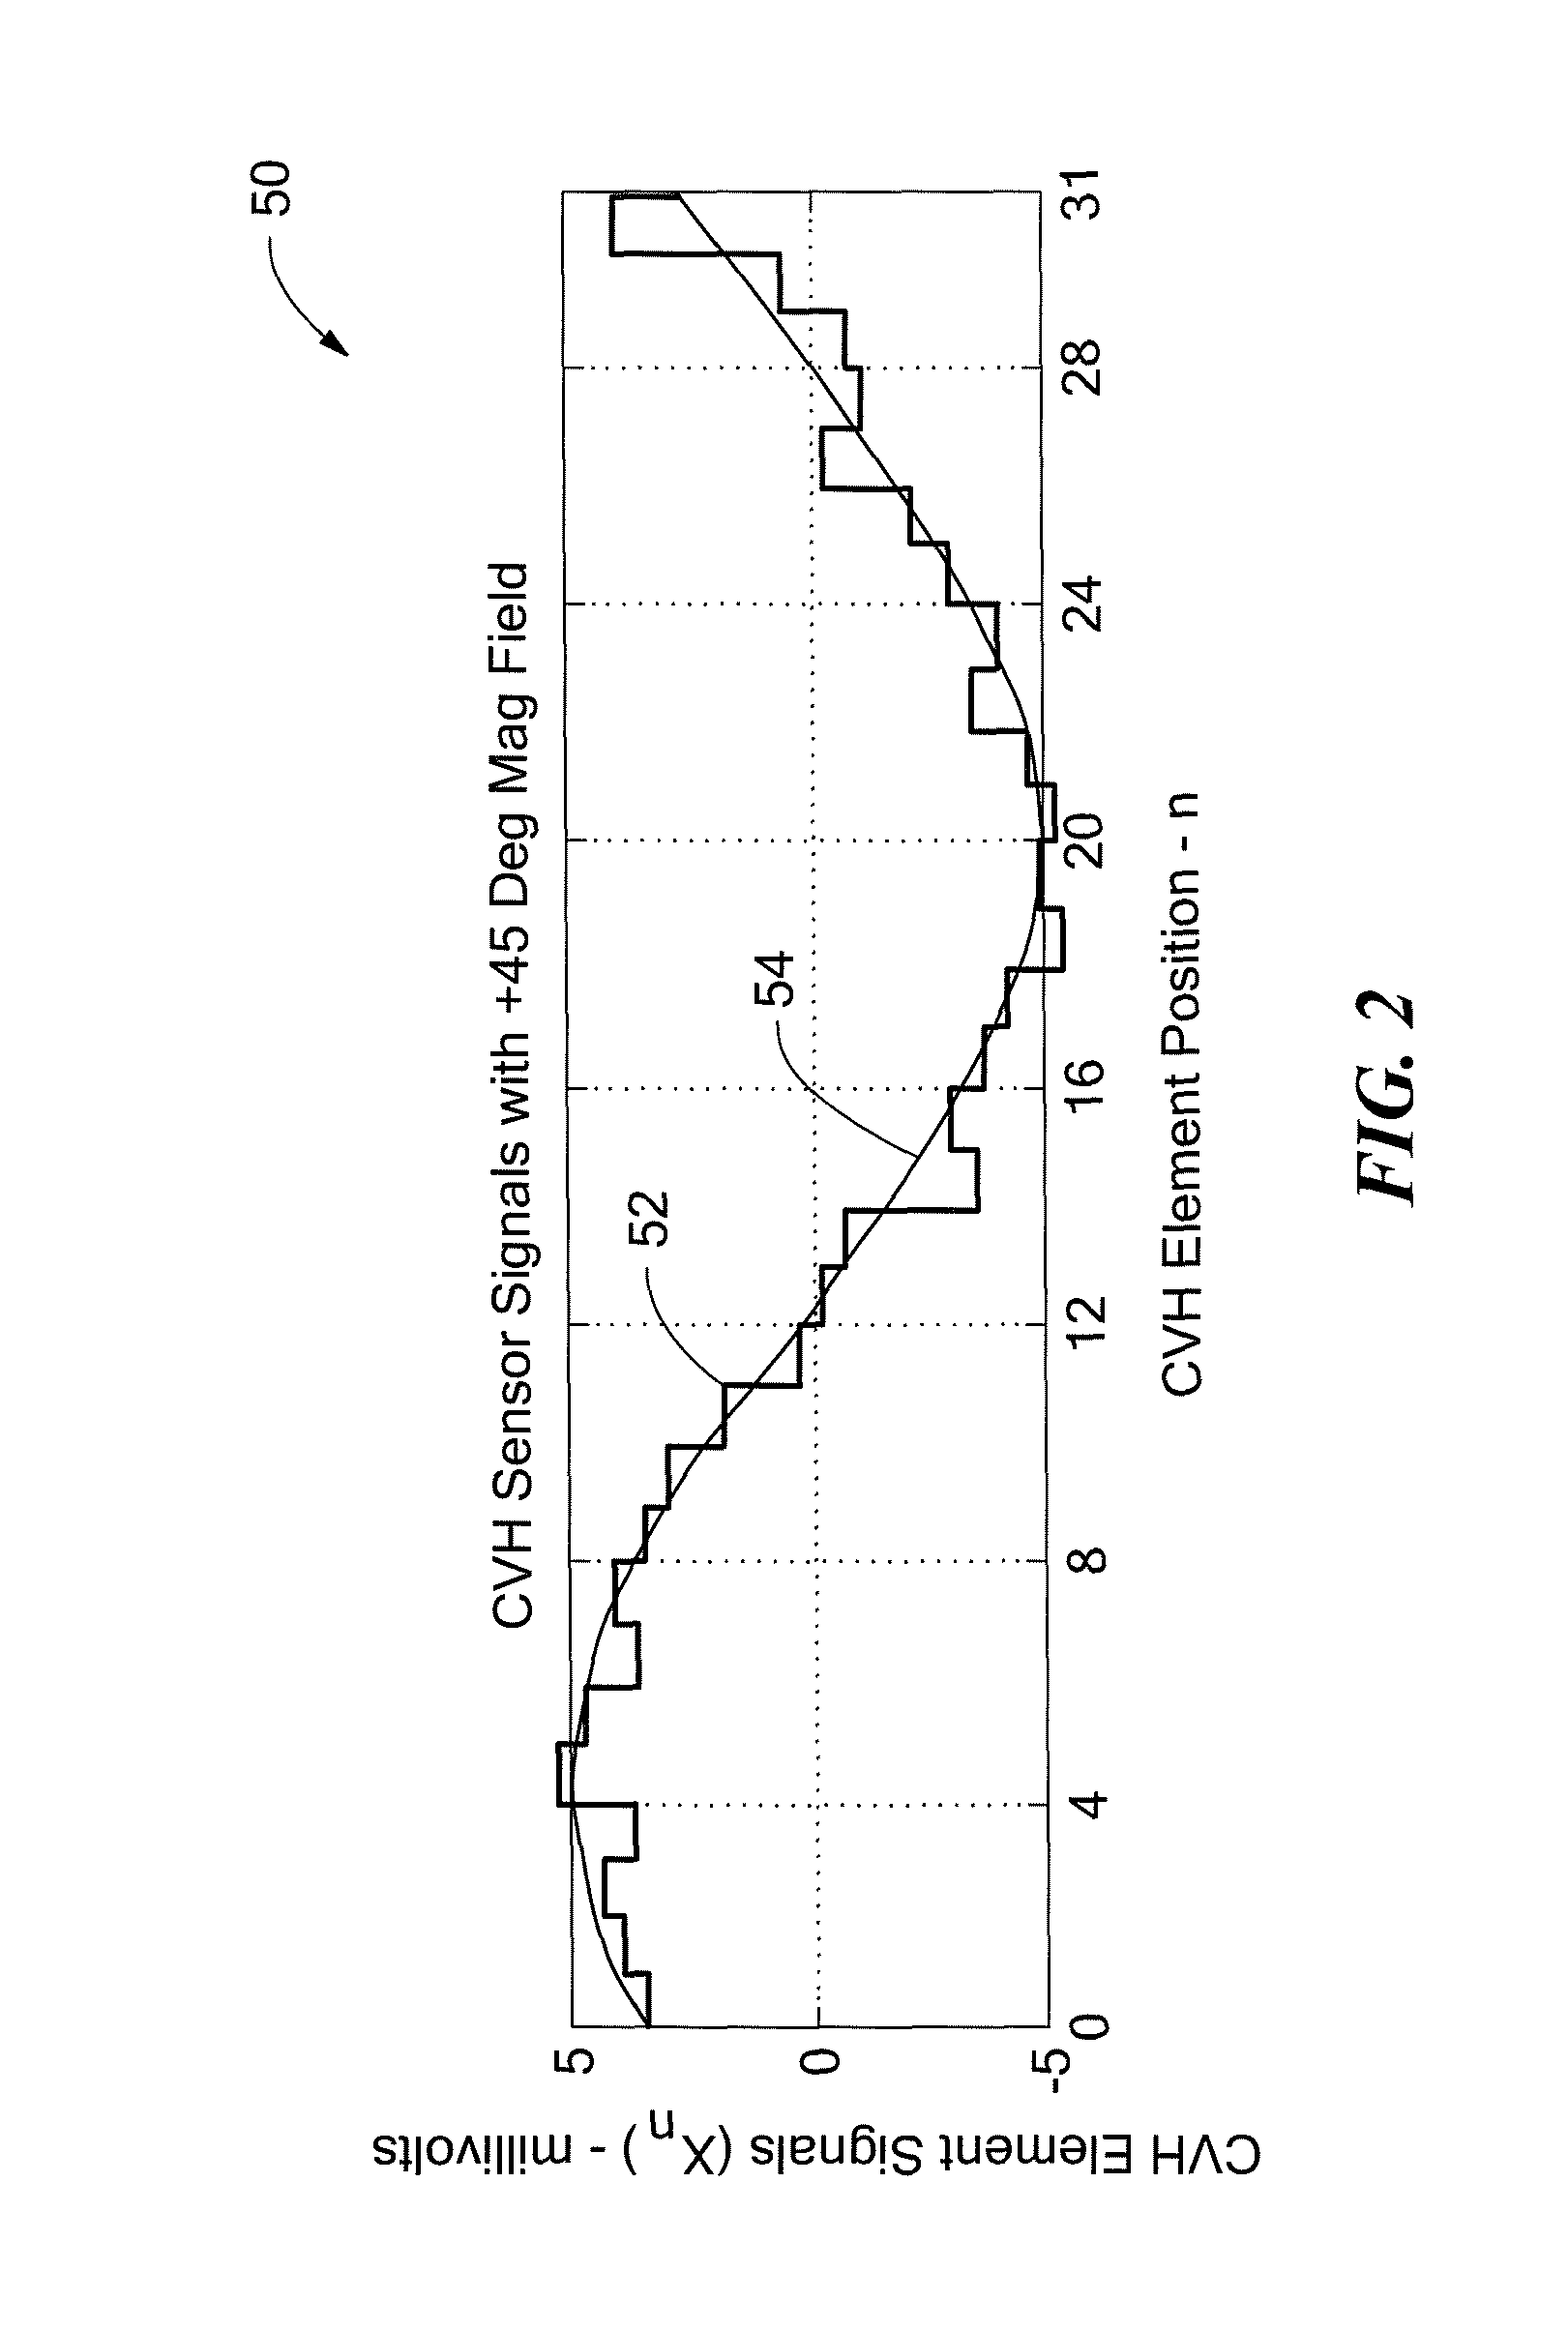 Circular vertical hall magnetic field sensing element and method with a plurality of continuous output signals